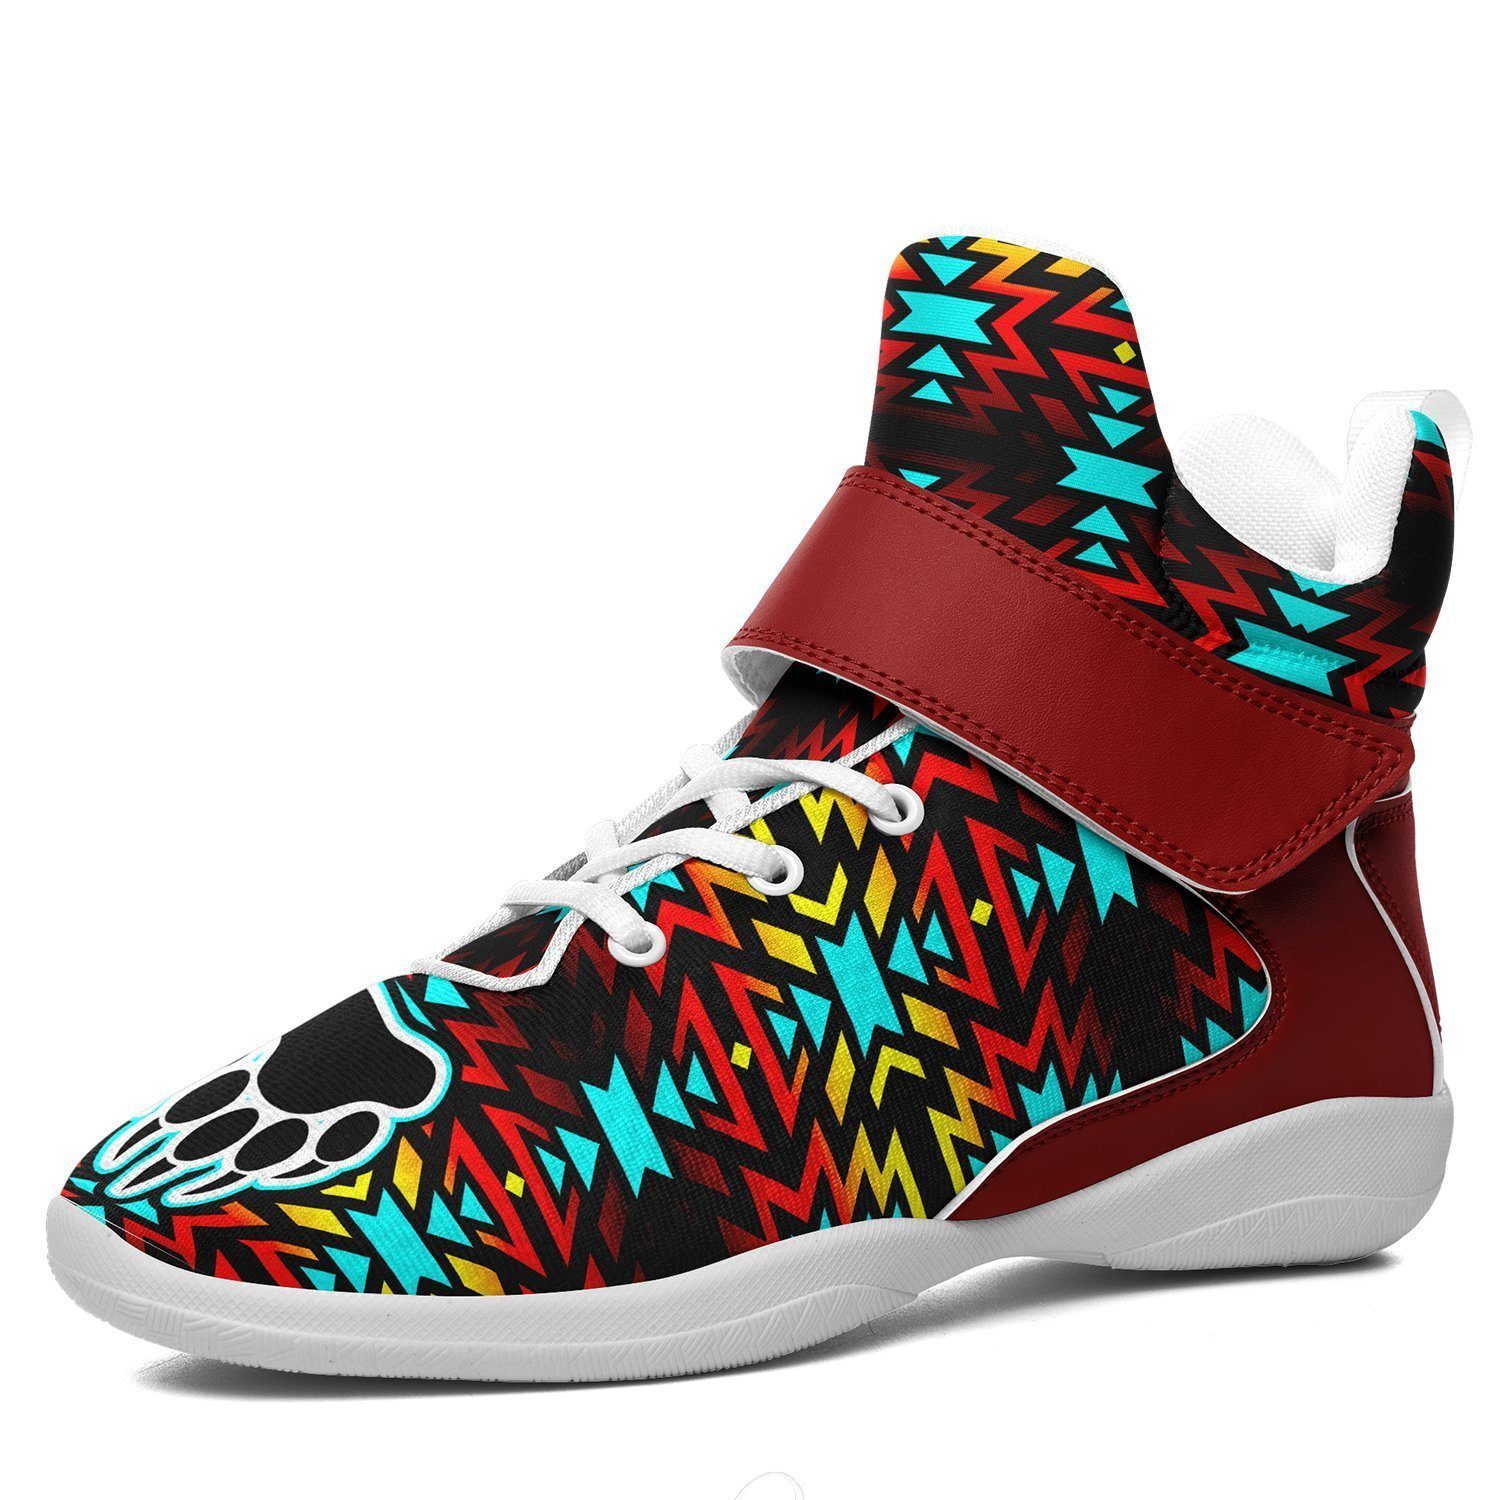 Fire Colors and Turquoise Bearpaw Kid's Ipottaa Basketball / Sport High Top Shoes 49 Dzine US Child 12.5 / EUR 30 White Sole with Dark Red Strap 